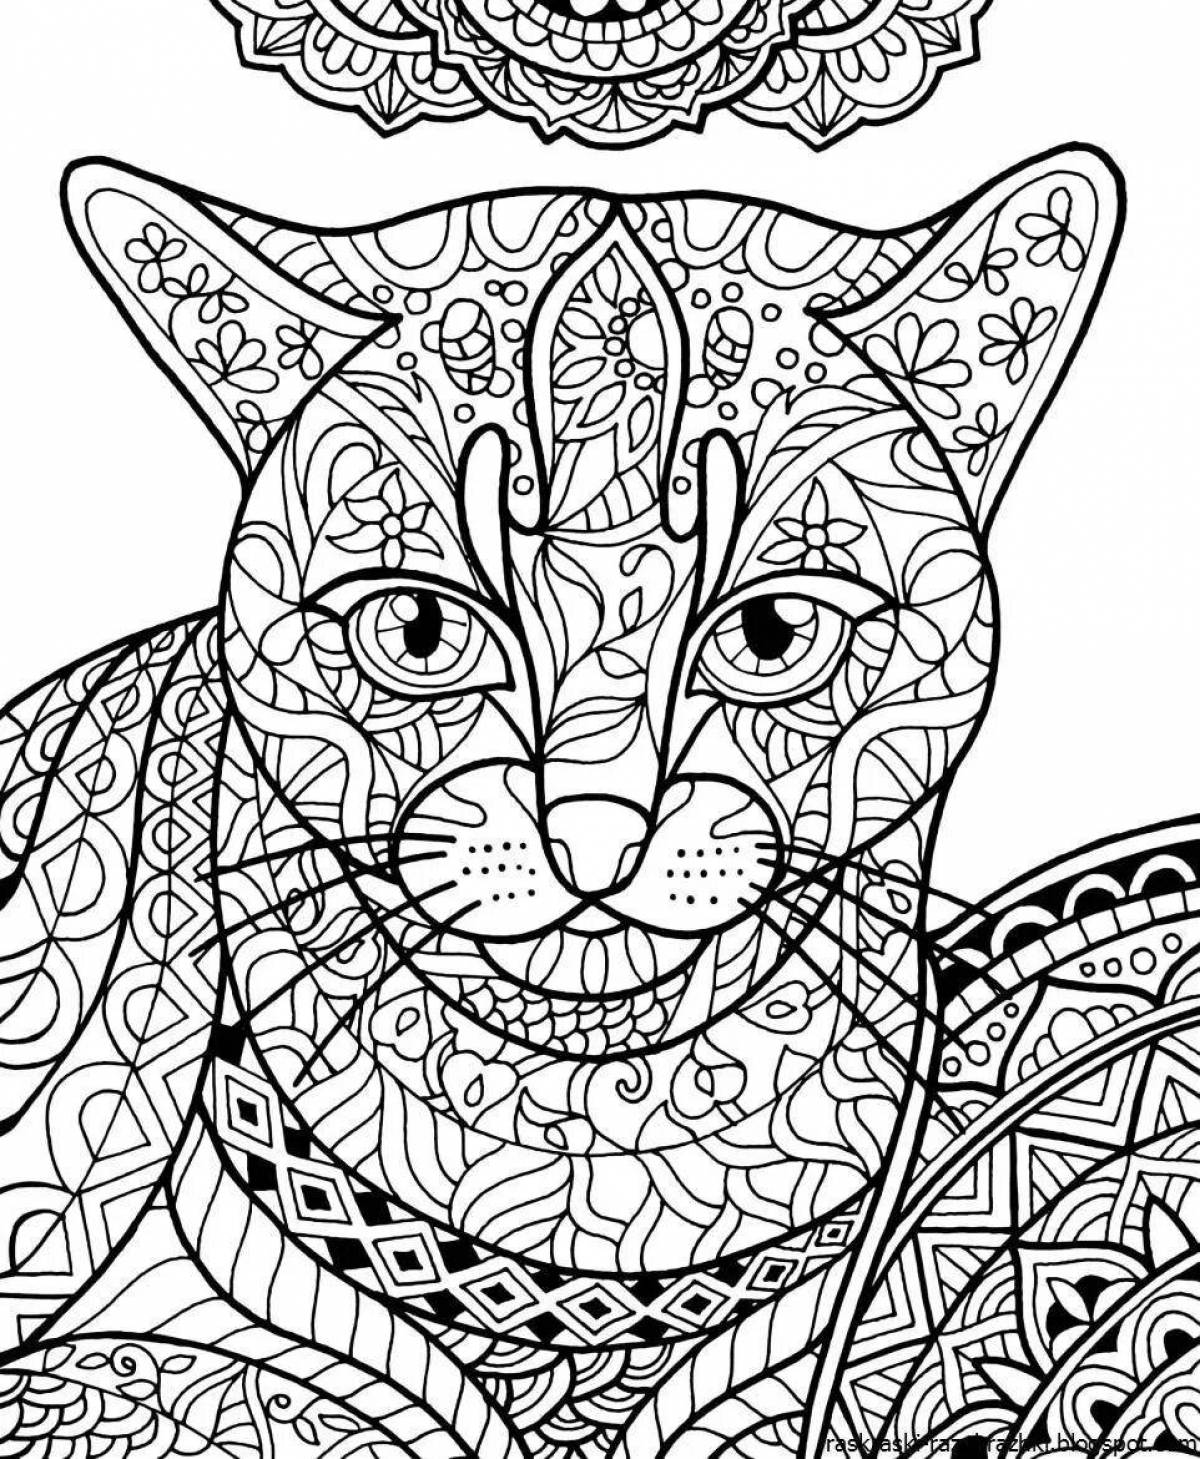 Fat simple adult coloring book